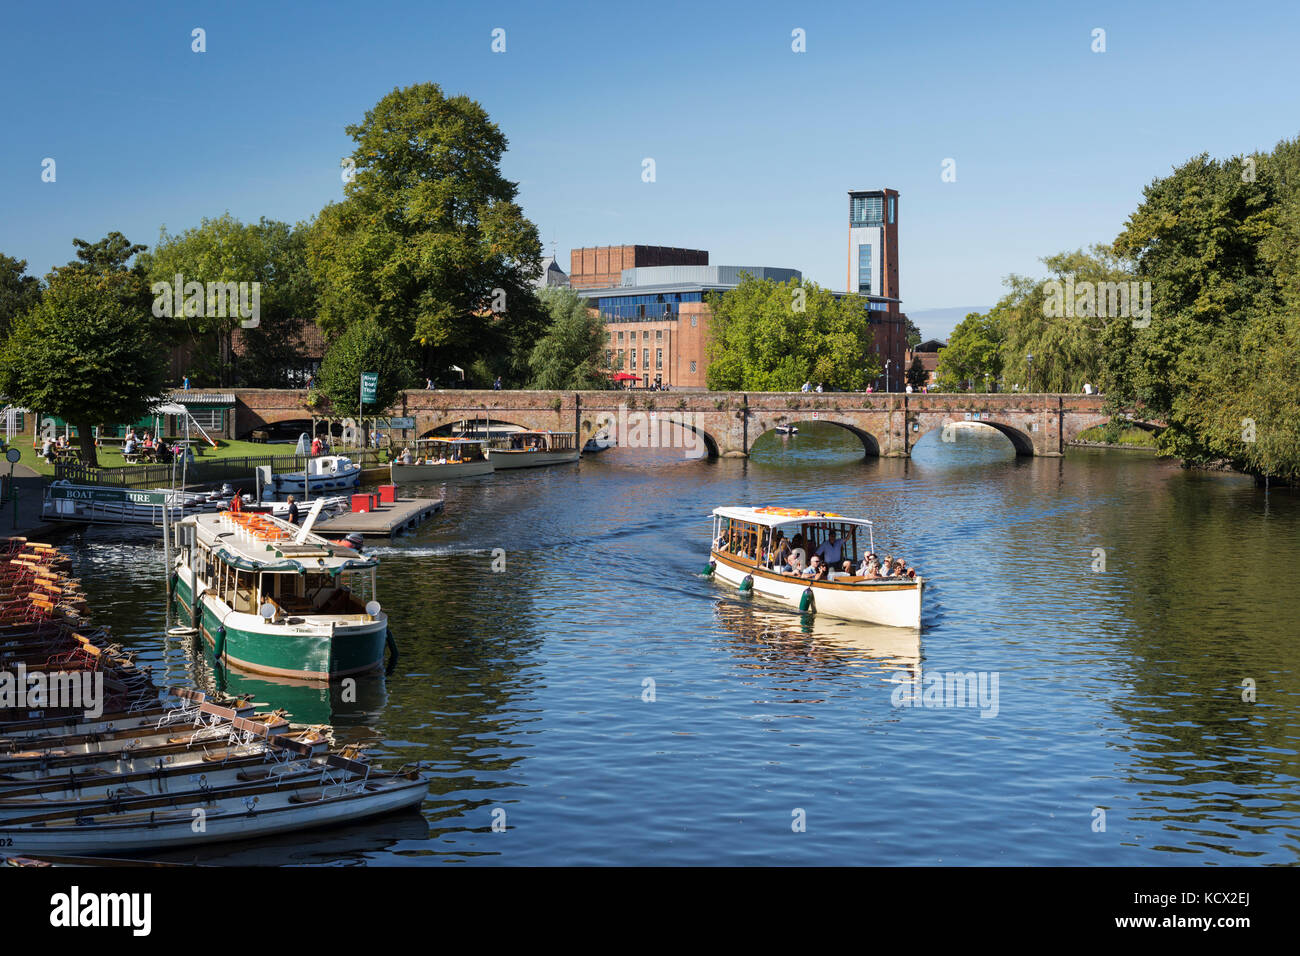 Tour boat on the River Avon with the Royal Shakespeare Theatre, Stratford-upon-Avon, Warwickshire, England, United Kingdom, Europe Stock Photo